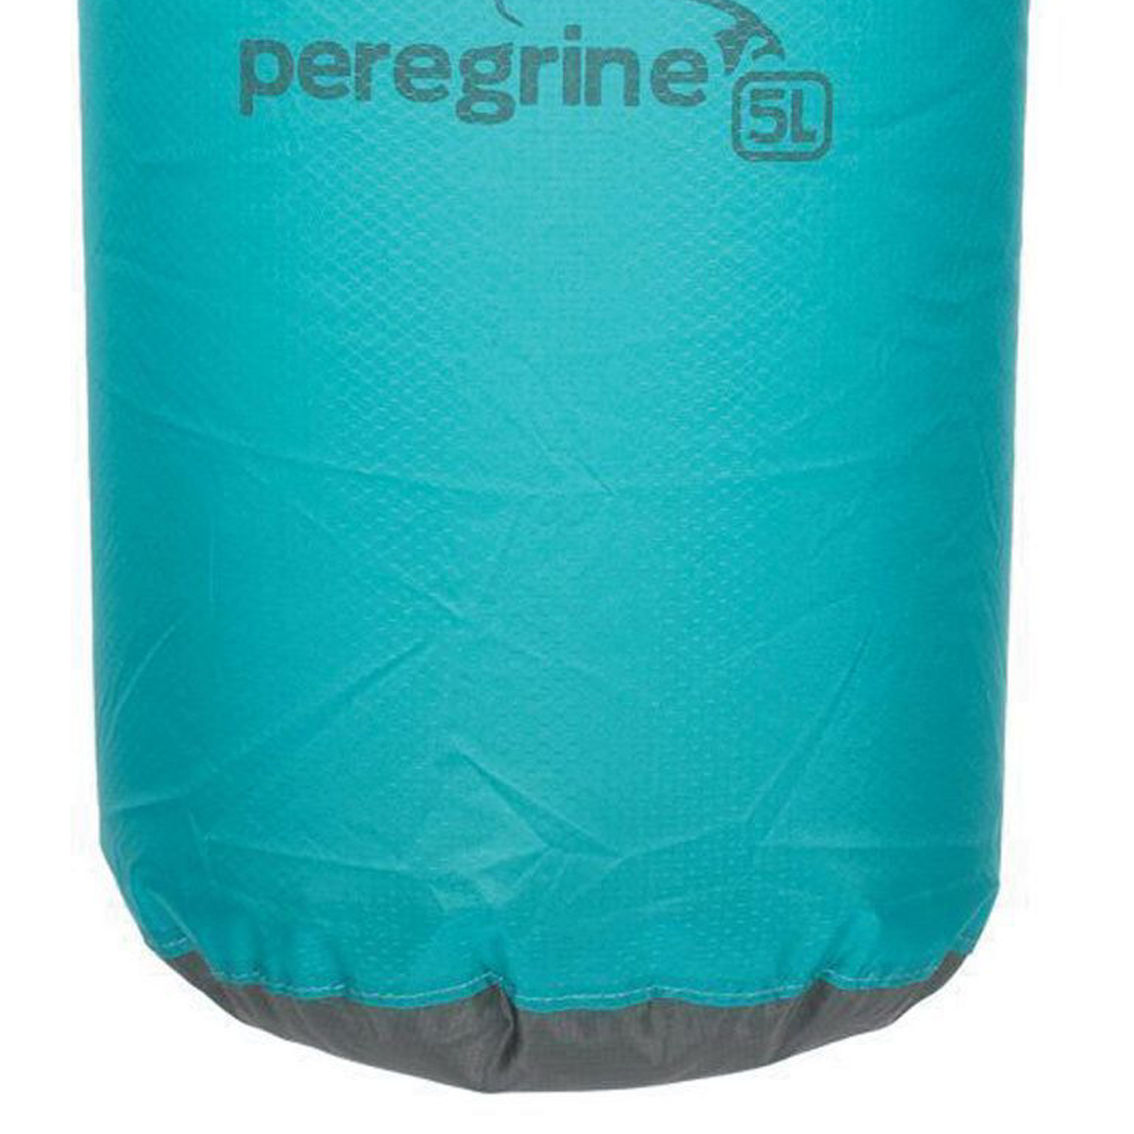 PEREGRINE PACK COVER 25-40L - Image 2 of 2